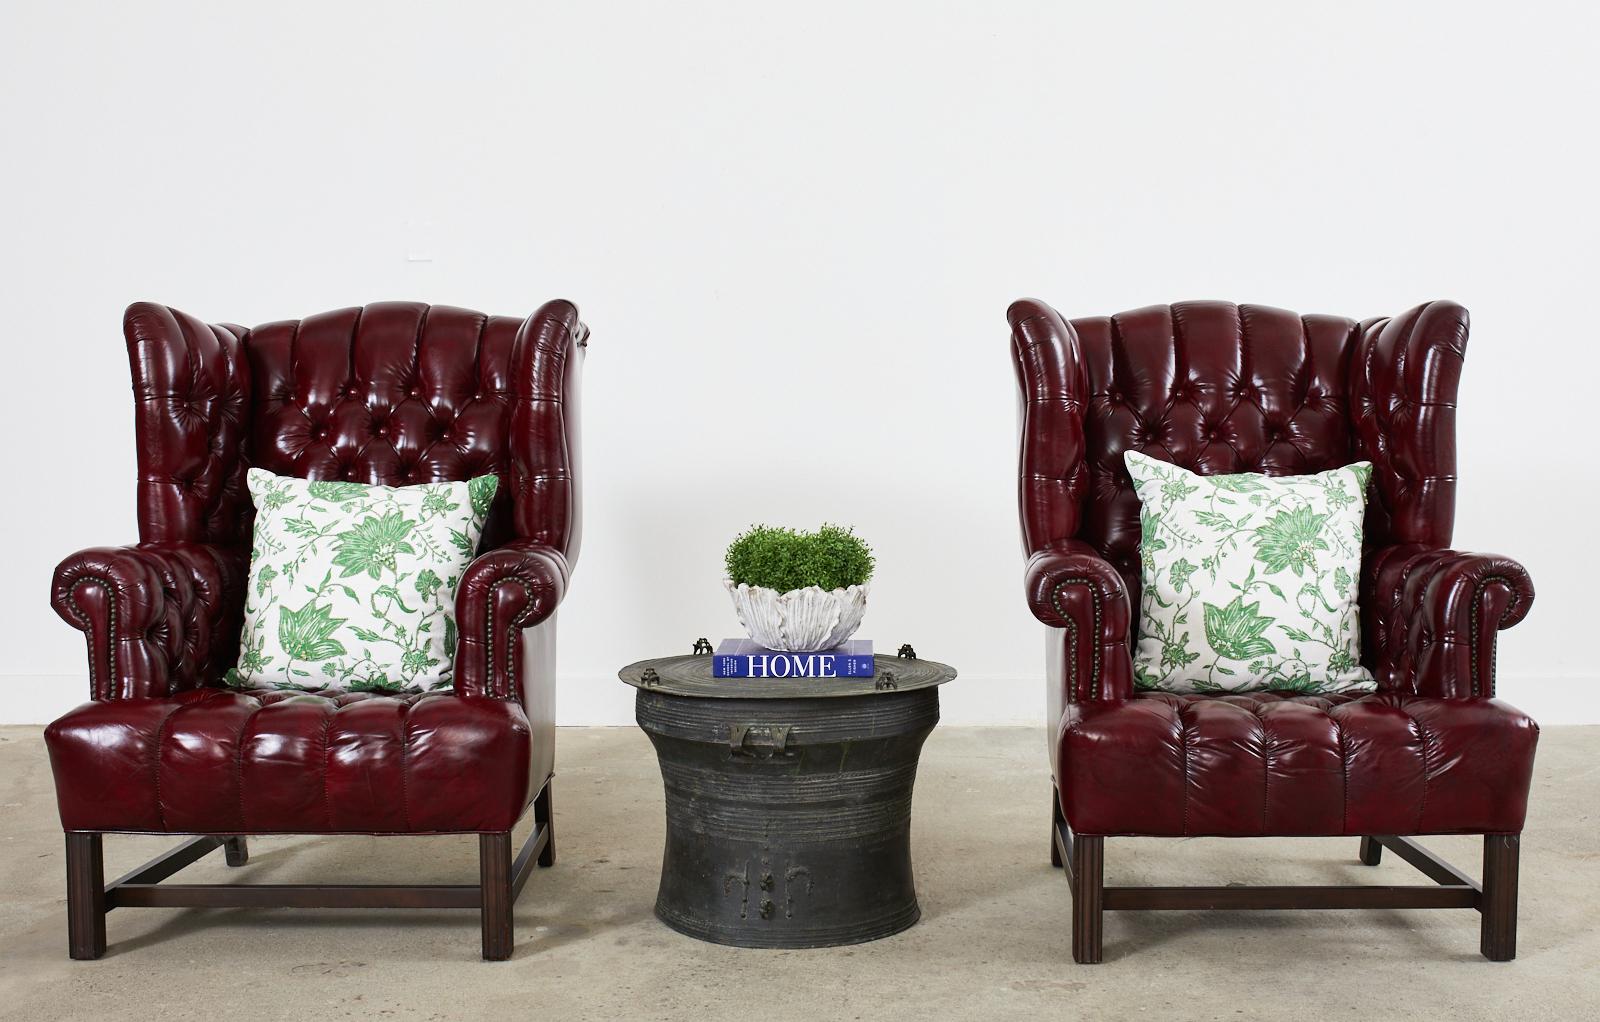 Opulent pair of English George III style tufted wingback armchairs. Made in the chesterfield style featuring a mahogany frame with a generous seating area and large fully developed wings. The English style rolled arms are accented by patinated brass